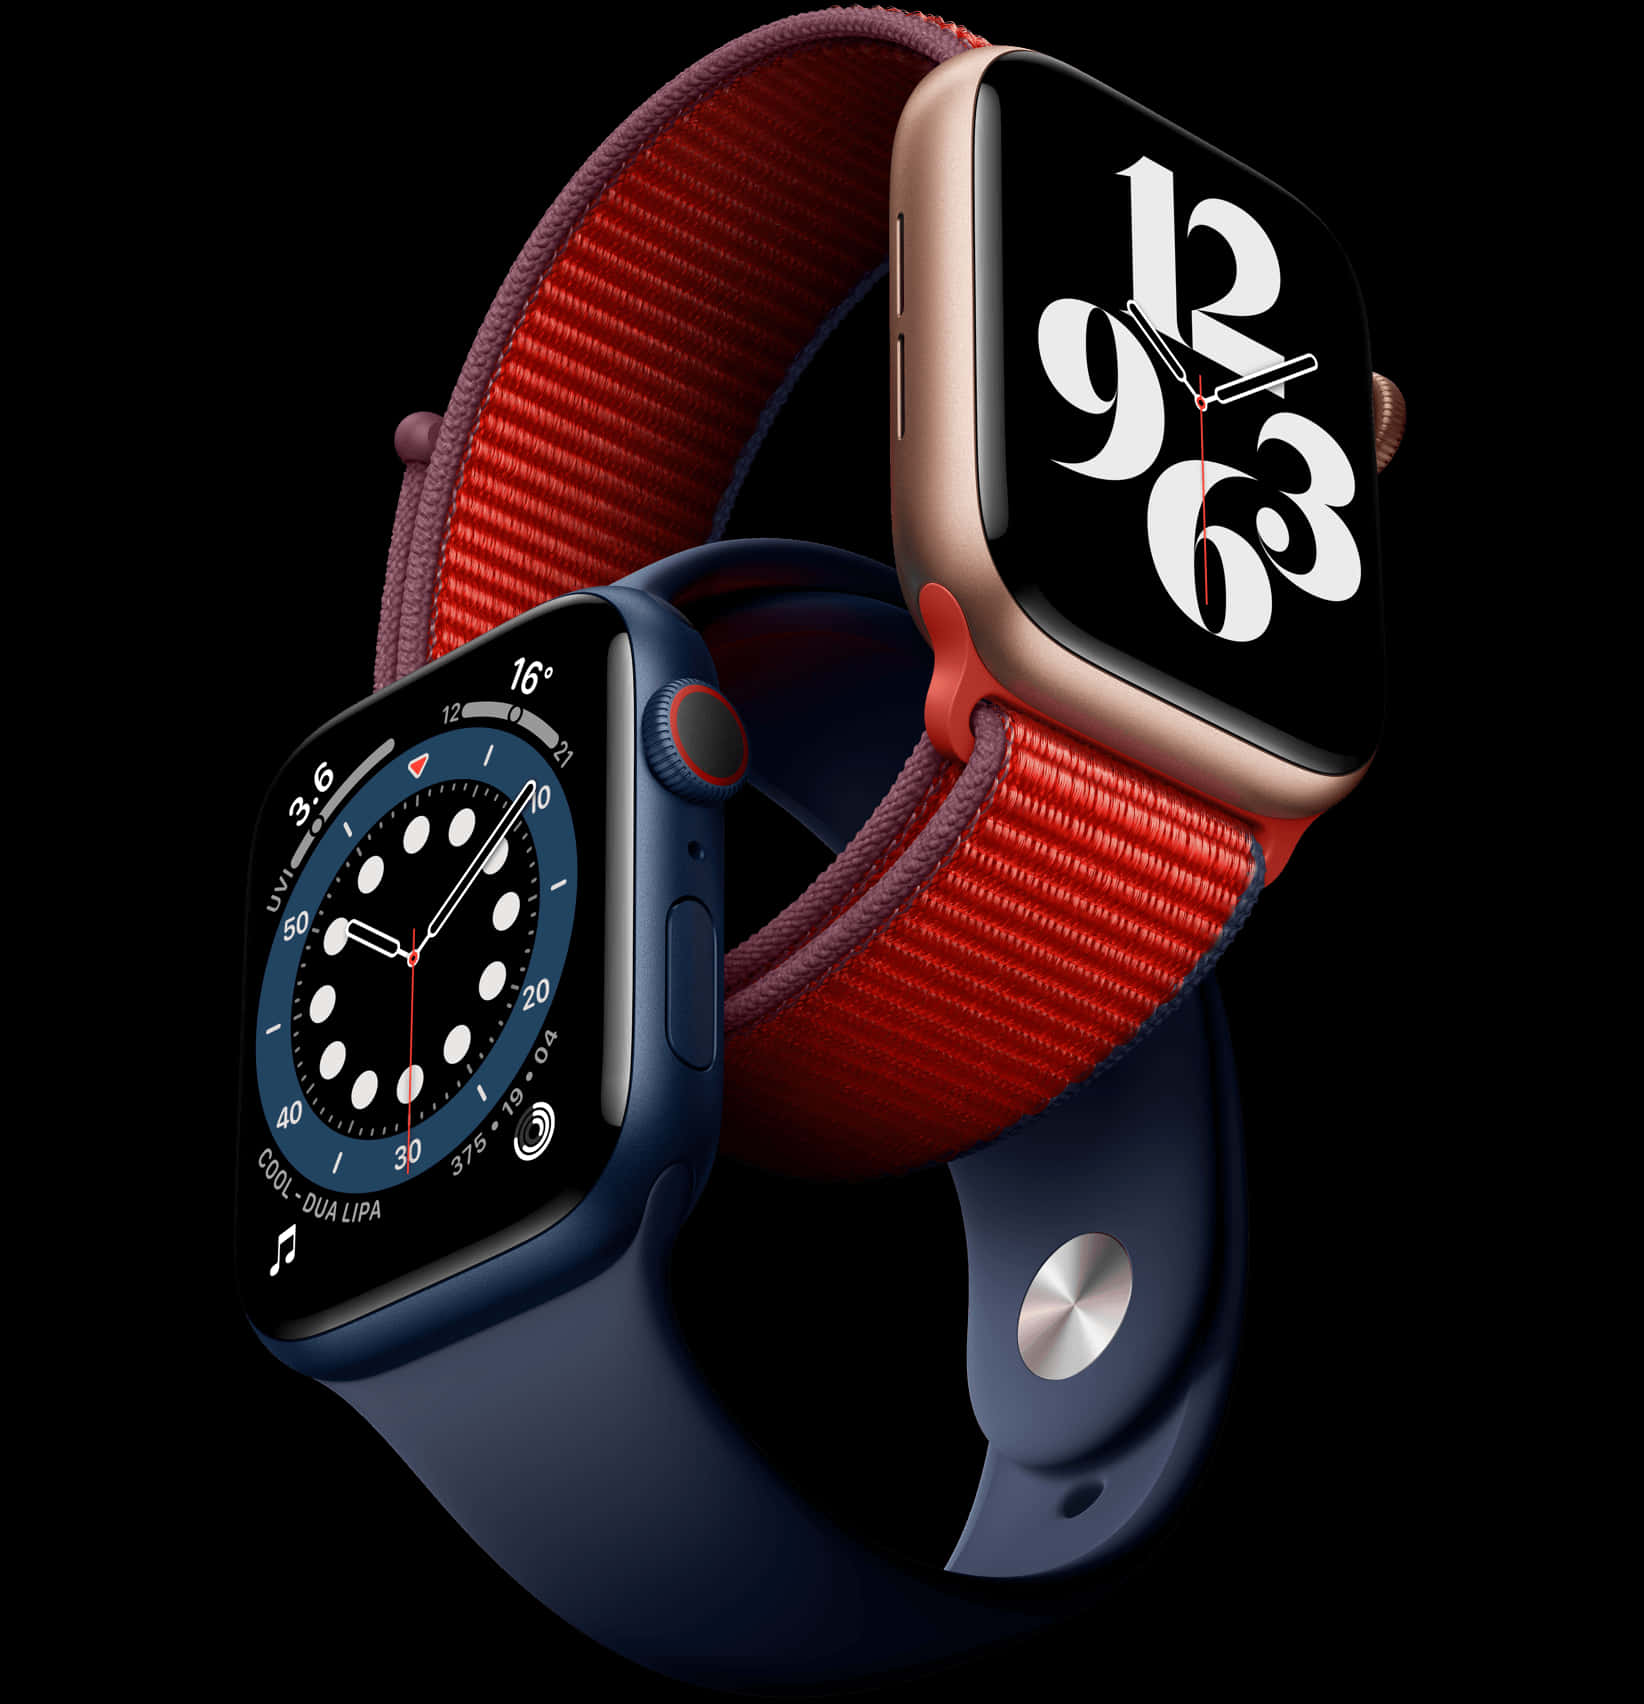 "Experience the power of Apple in your wrist"